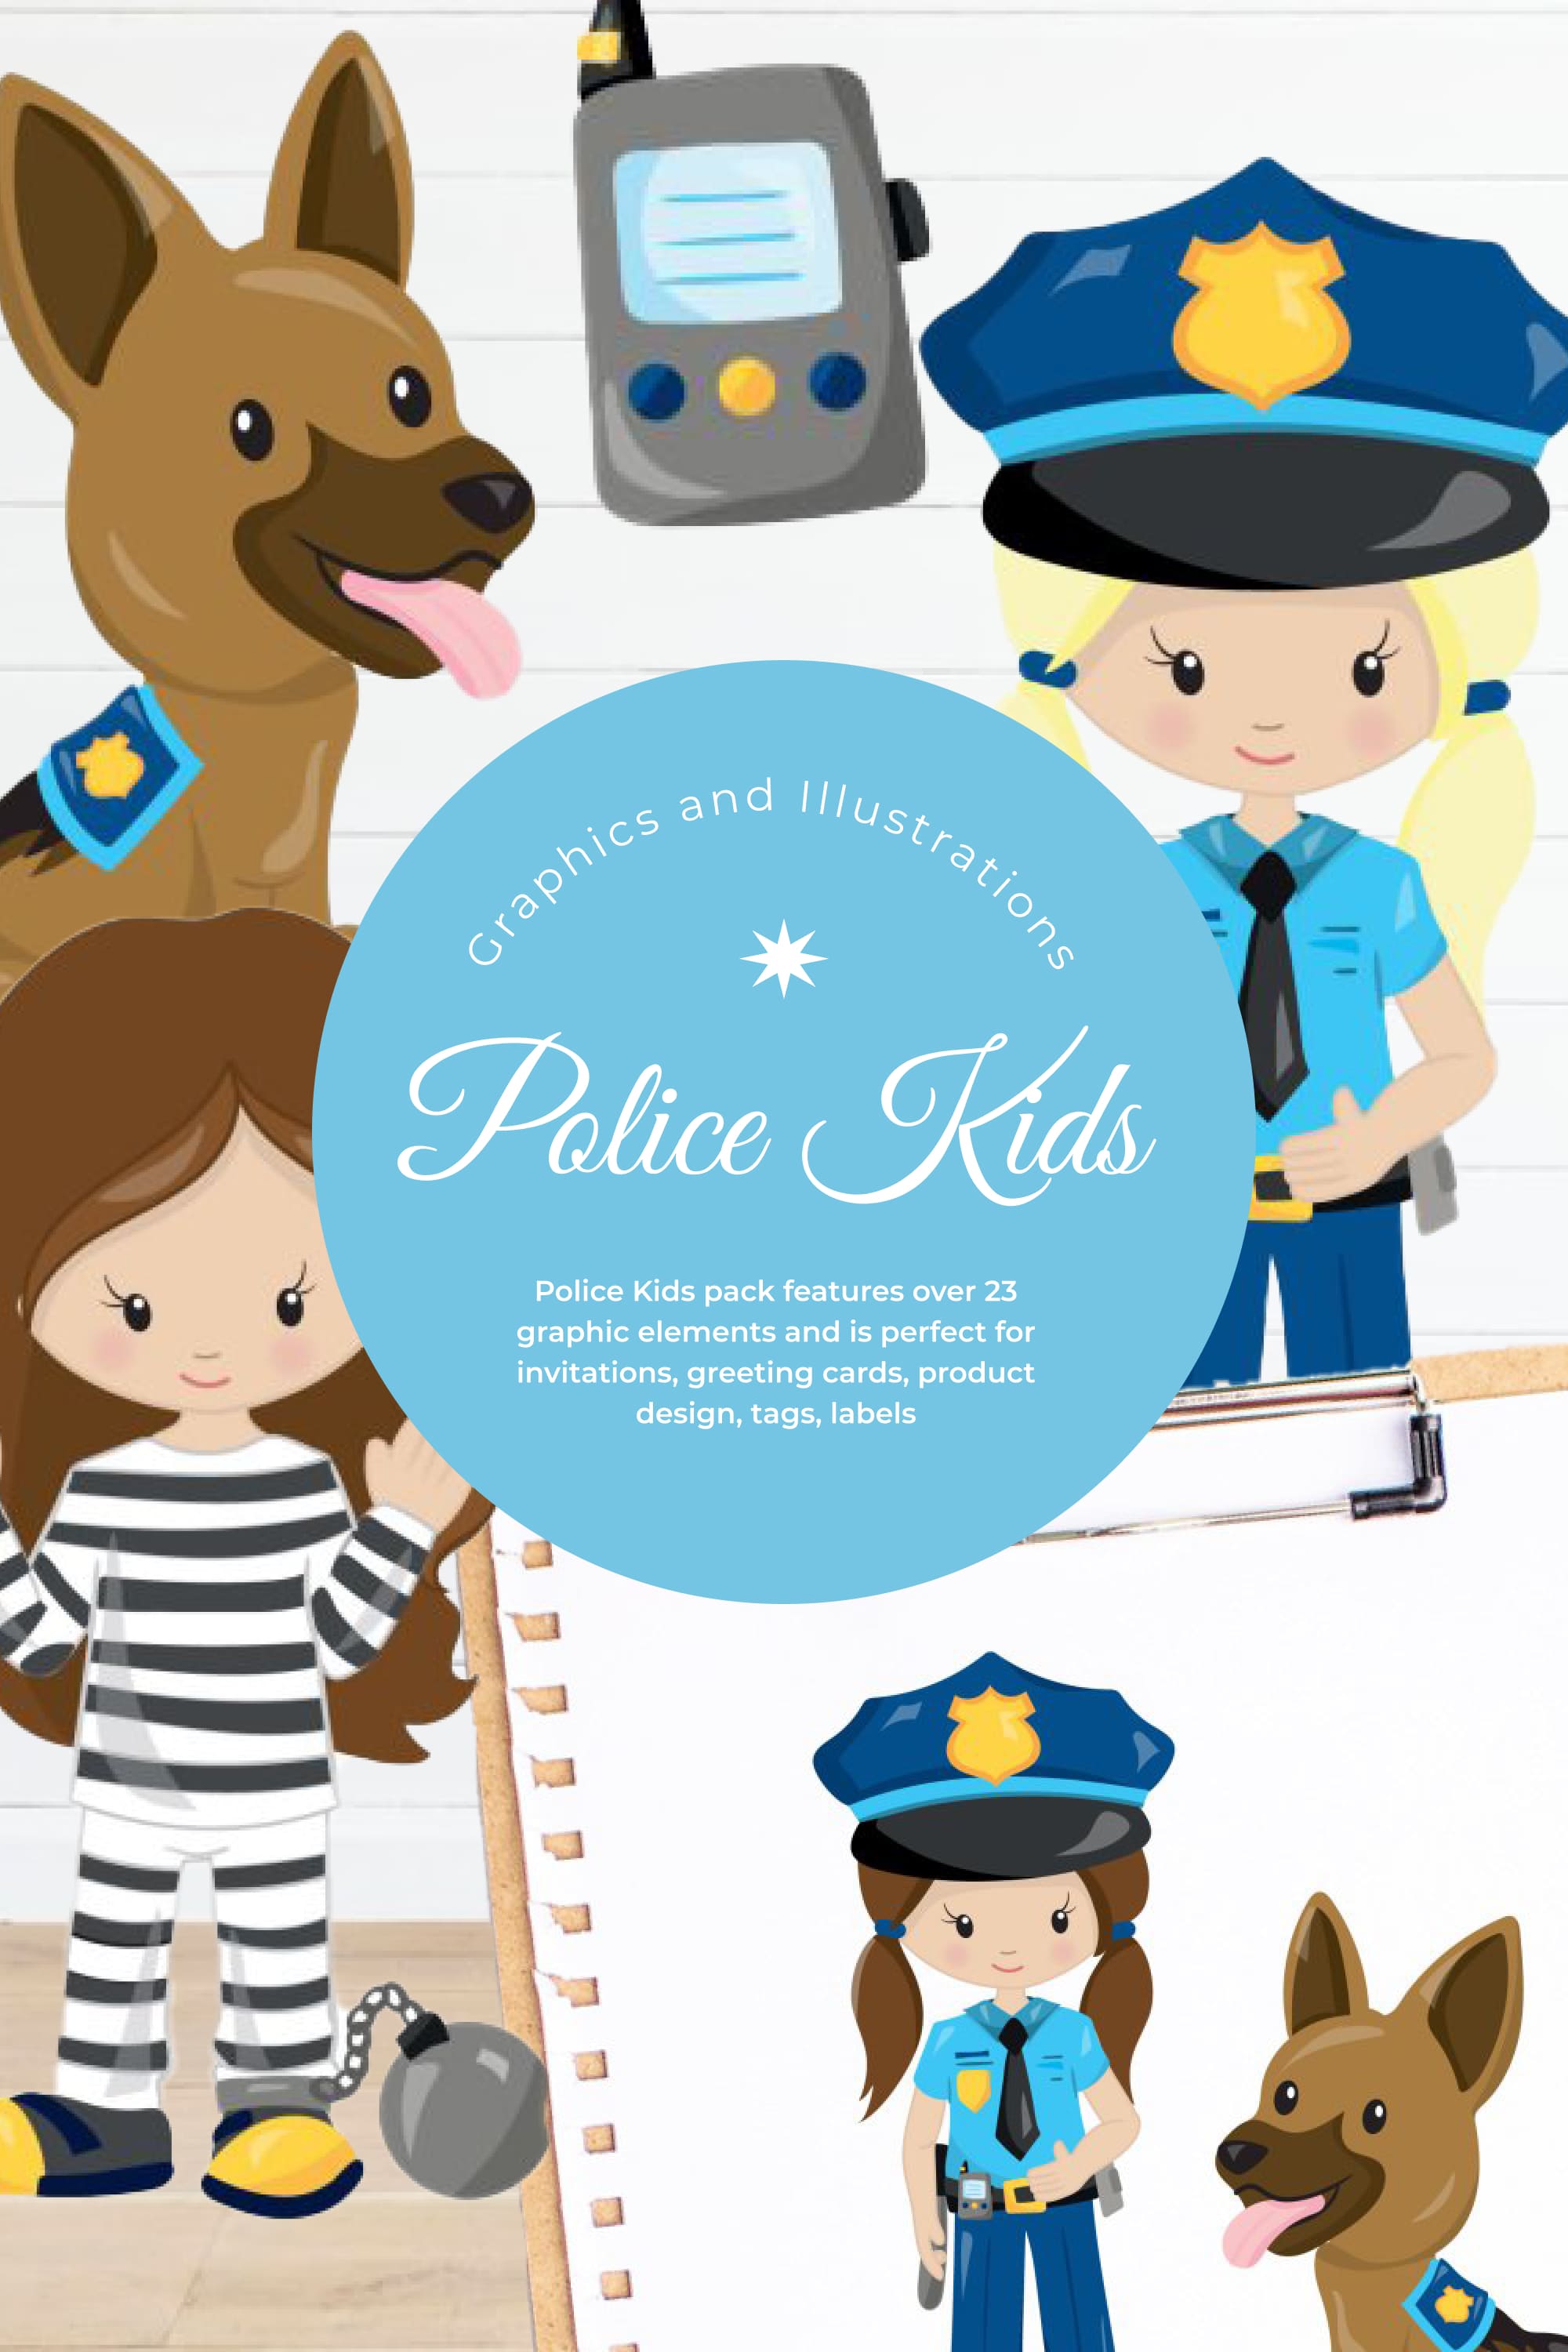 Police Kids Graphics And Illustrations - Pinterest.